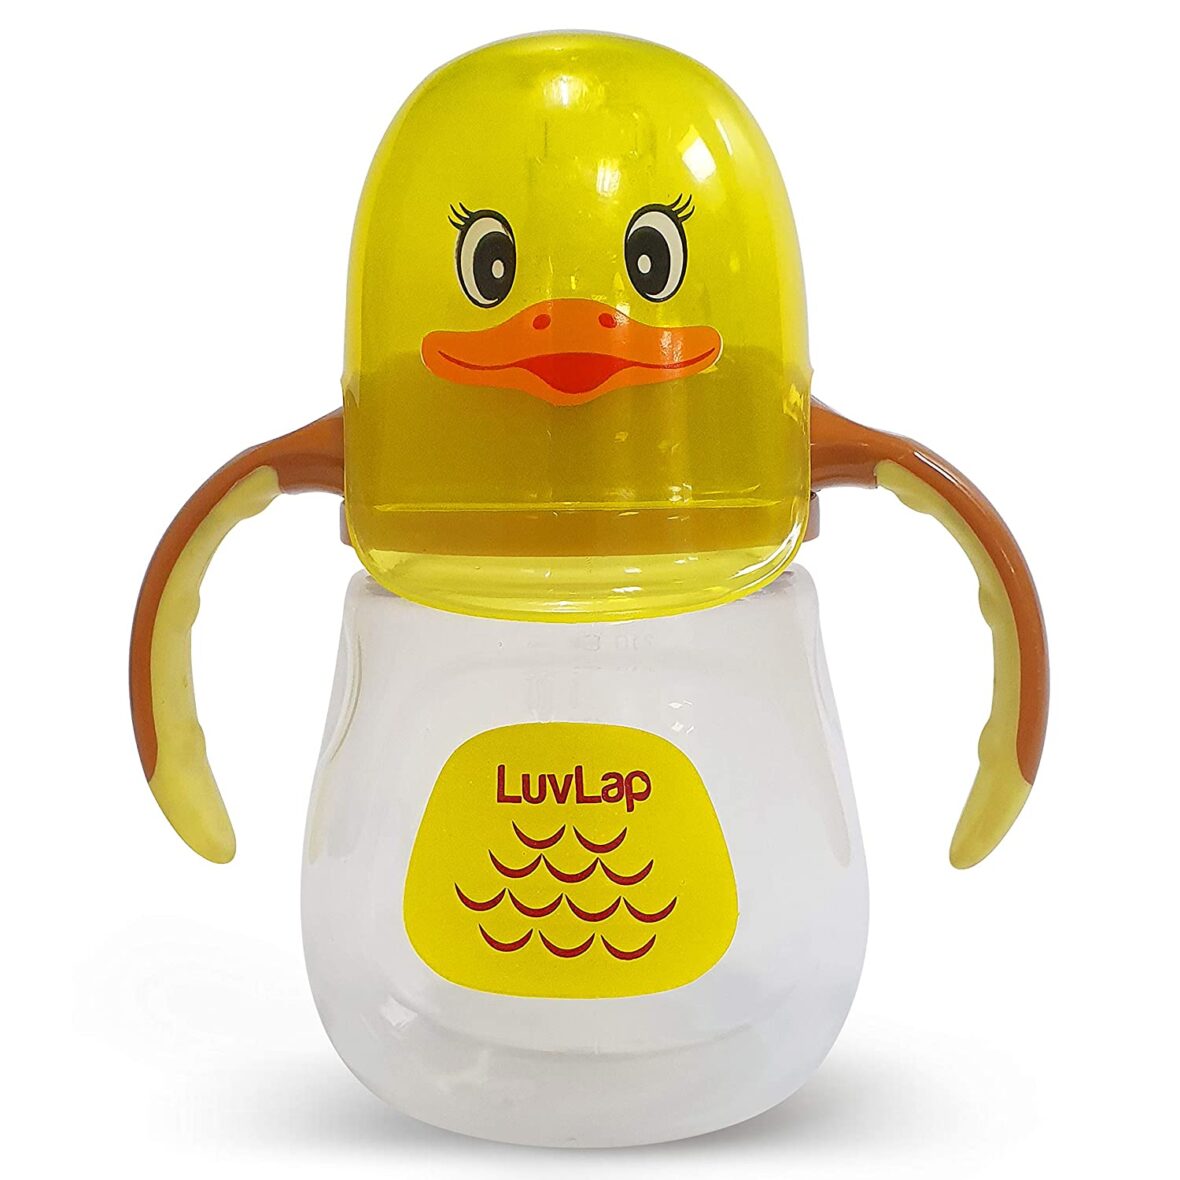 LuvLap Naughty Duck Spout Sipper for Infant/Toddler, 210ml, Anti-Spill Sippy Cup with Soft Silicone Spout BPA Free, 6m+ (Yellow)